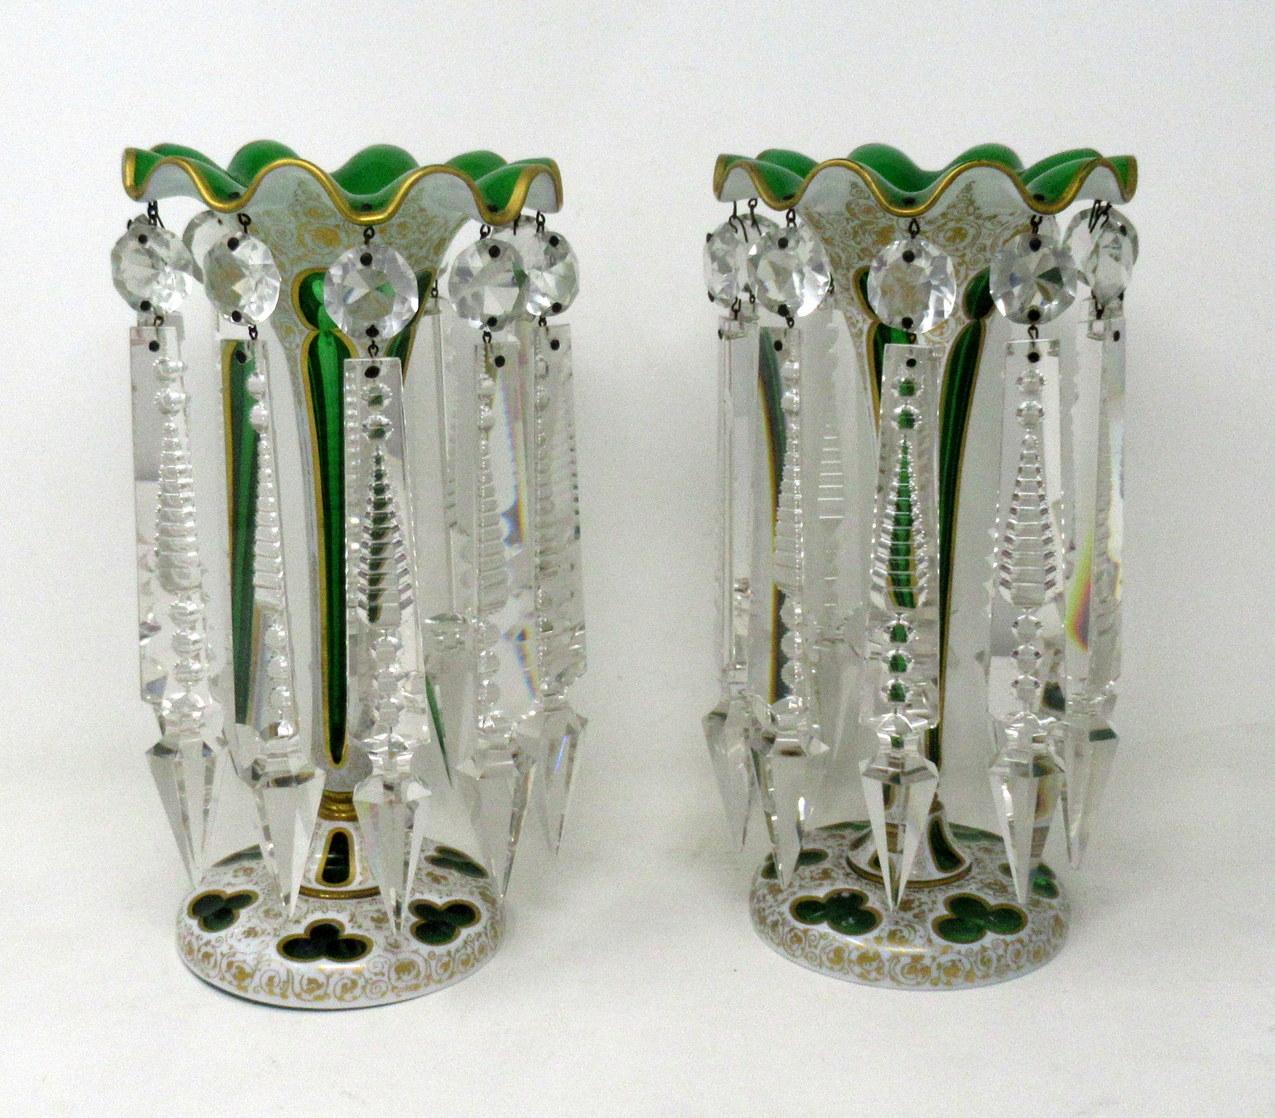 A stylish example of a fine pair of Bohemian emerald green gilt heightened white enamel handcut full lead crystal lusters of outstanding quality and of standard proportions. Third quarter of the 19th century, possibly earlier.

Each with unusual